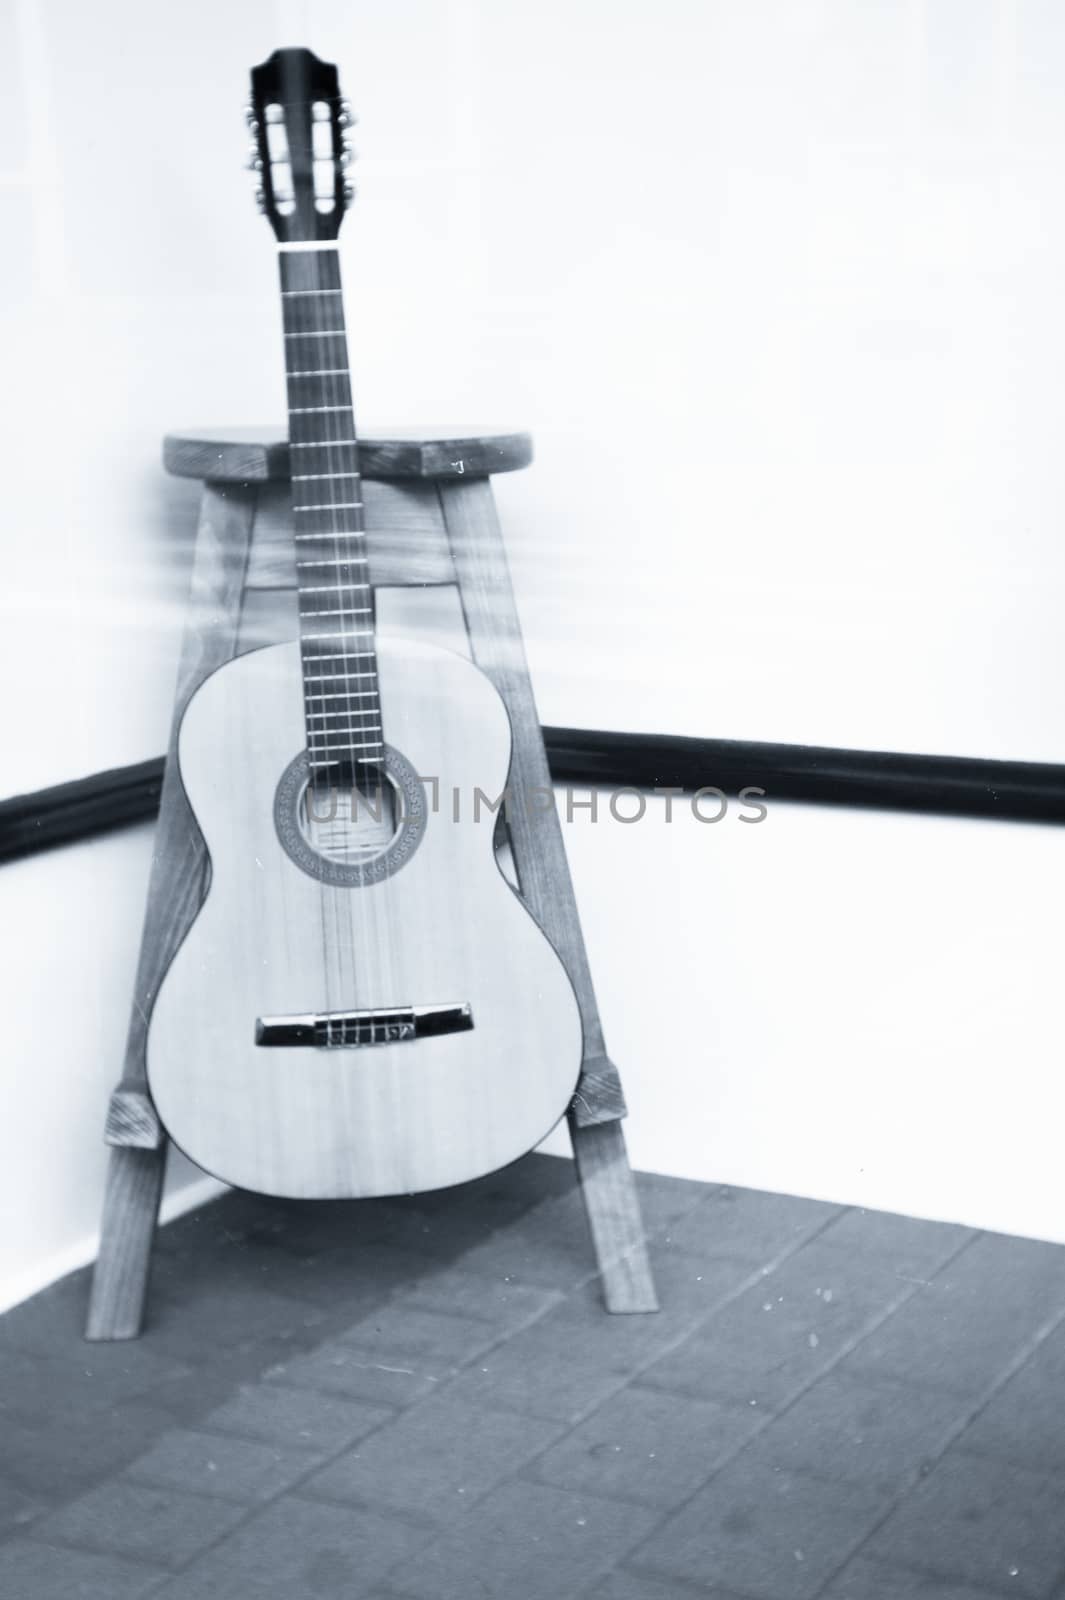 Spanish guitar musical instrument perched on a tripod. No people